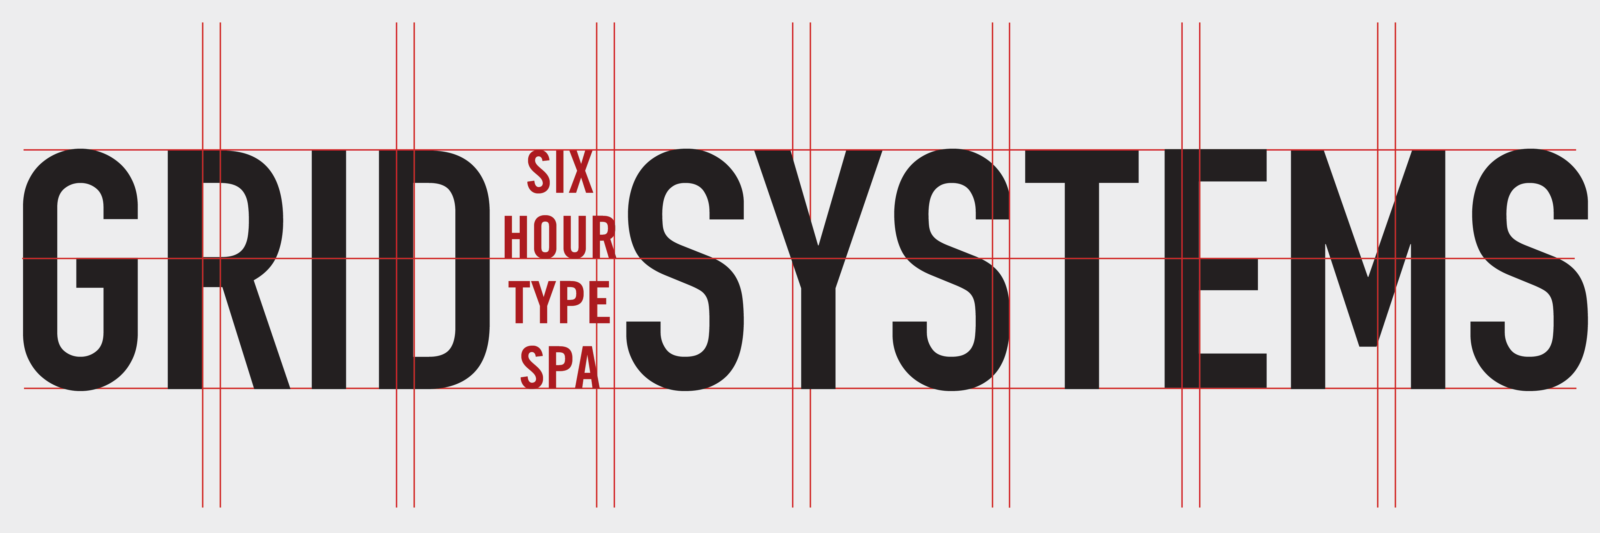 Grid Systems Type Spa 6